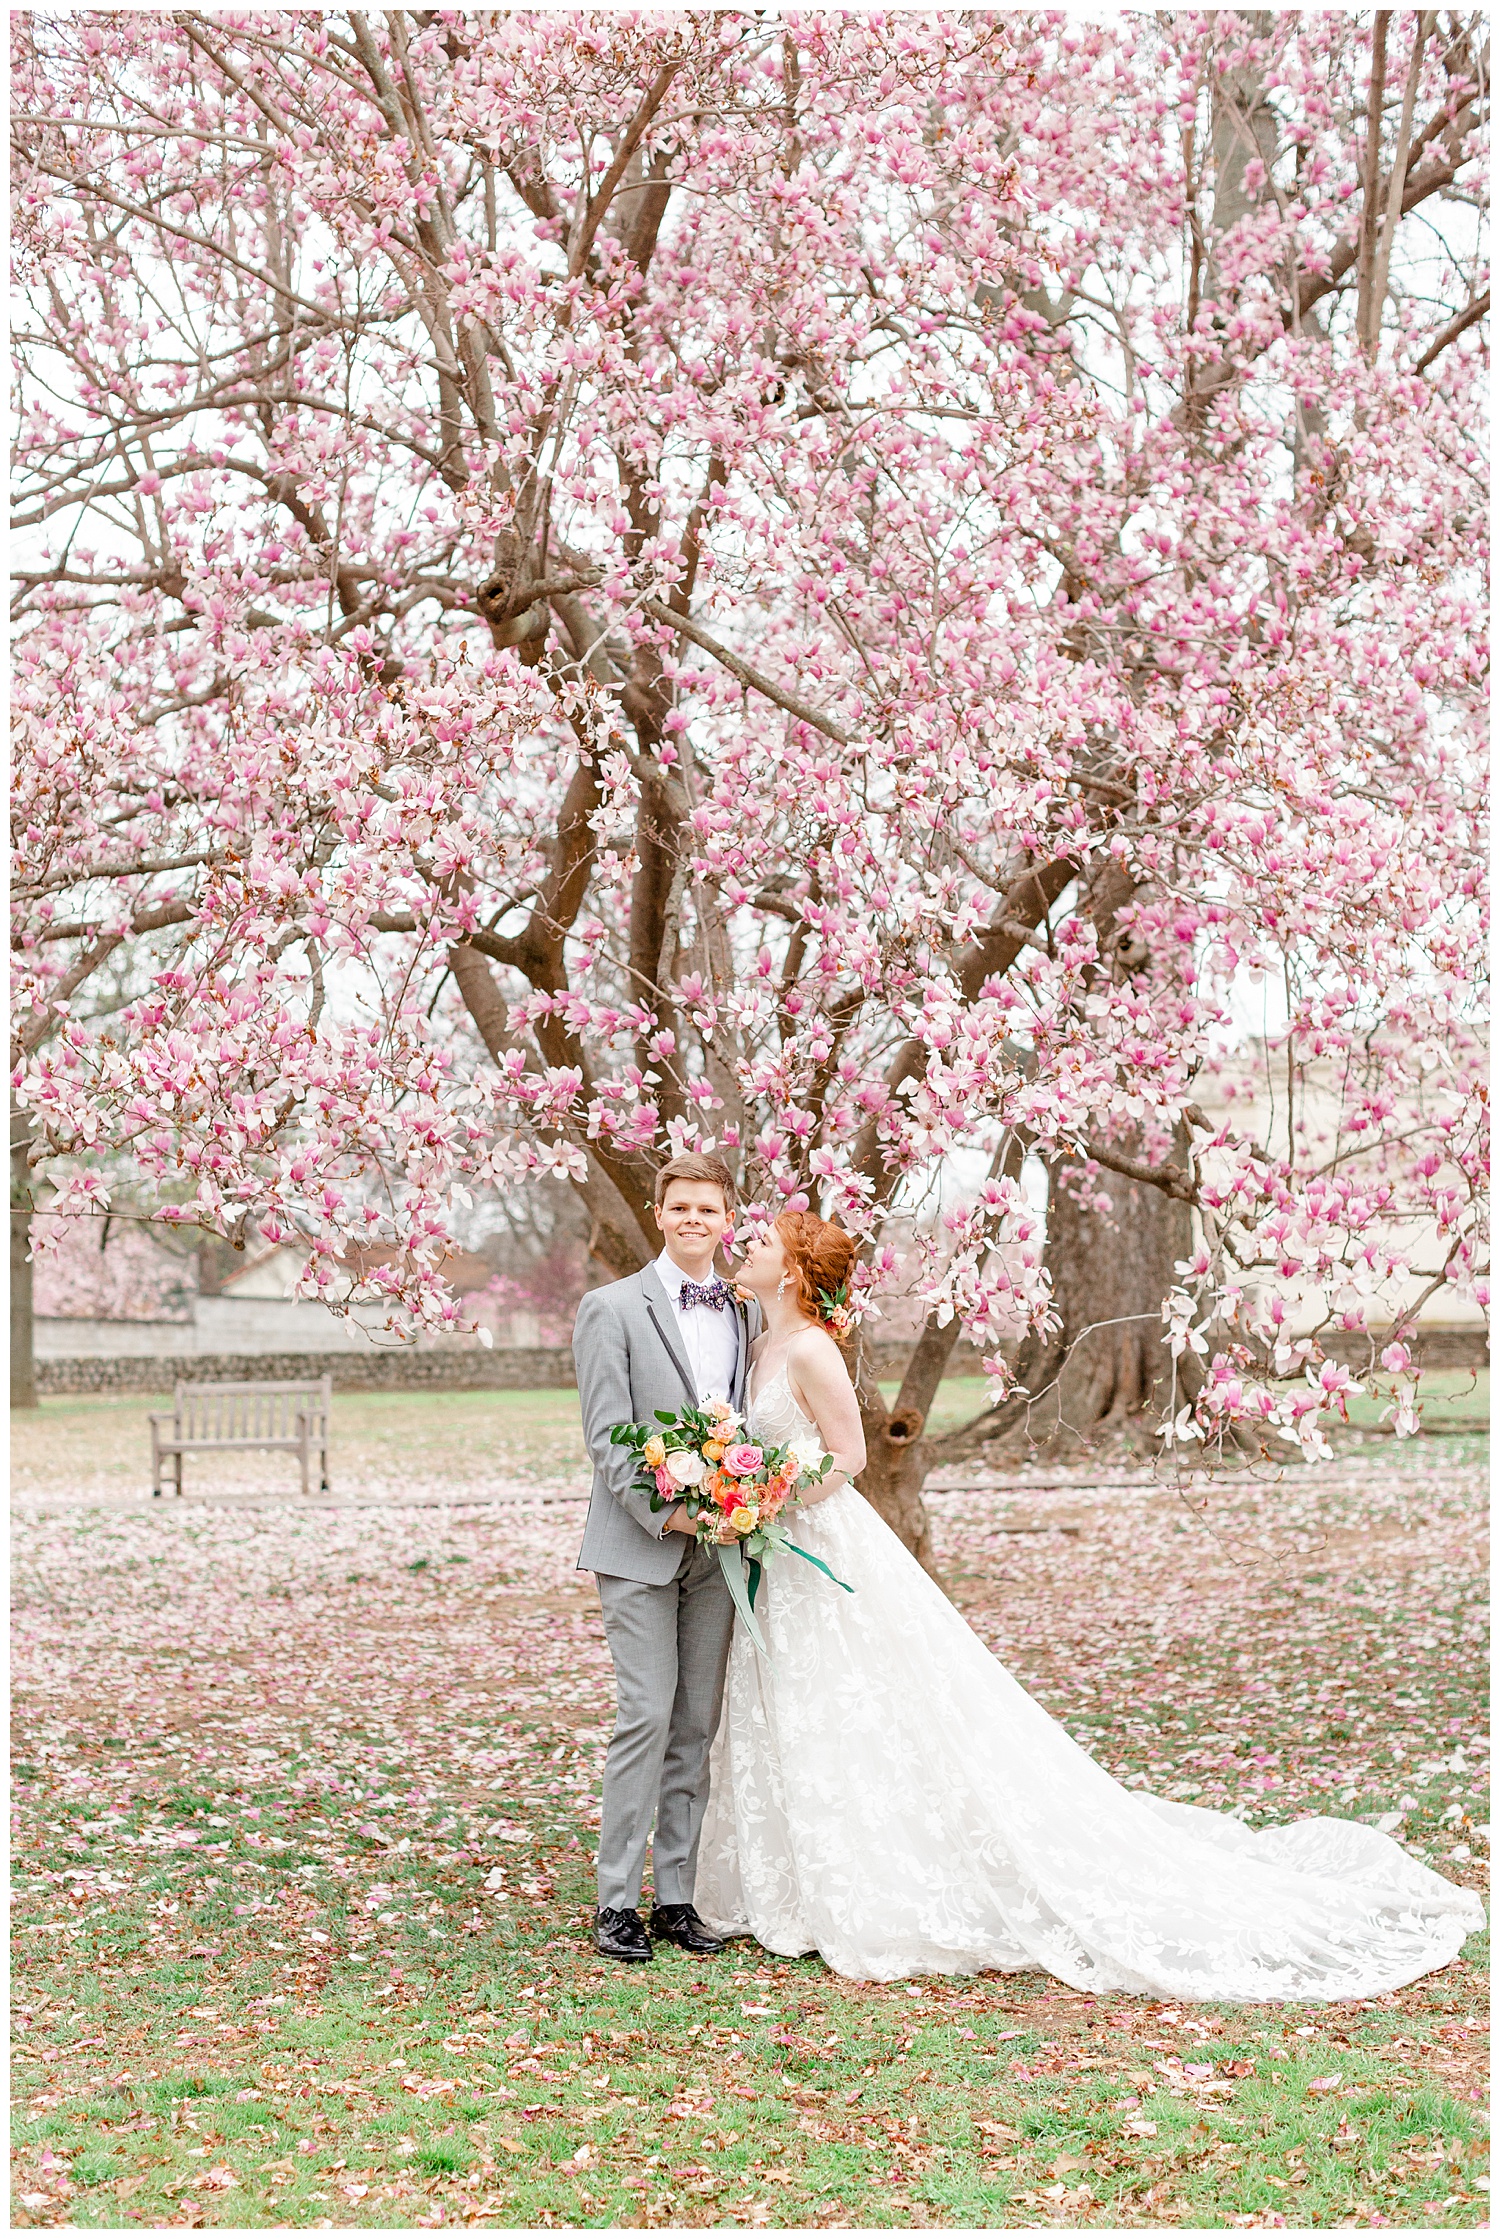 Bride and groom standing under the cherry blossom tree in the rain.